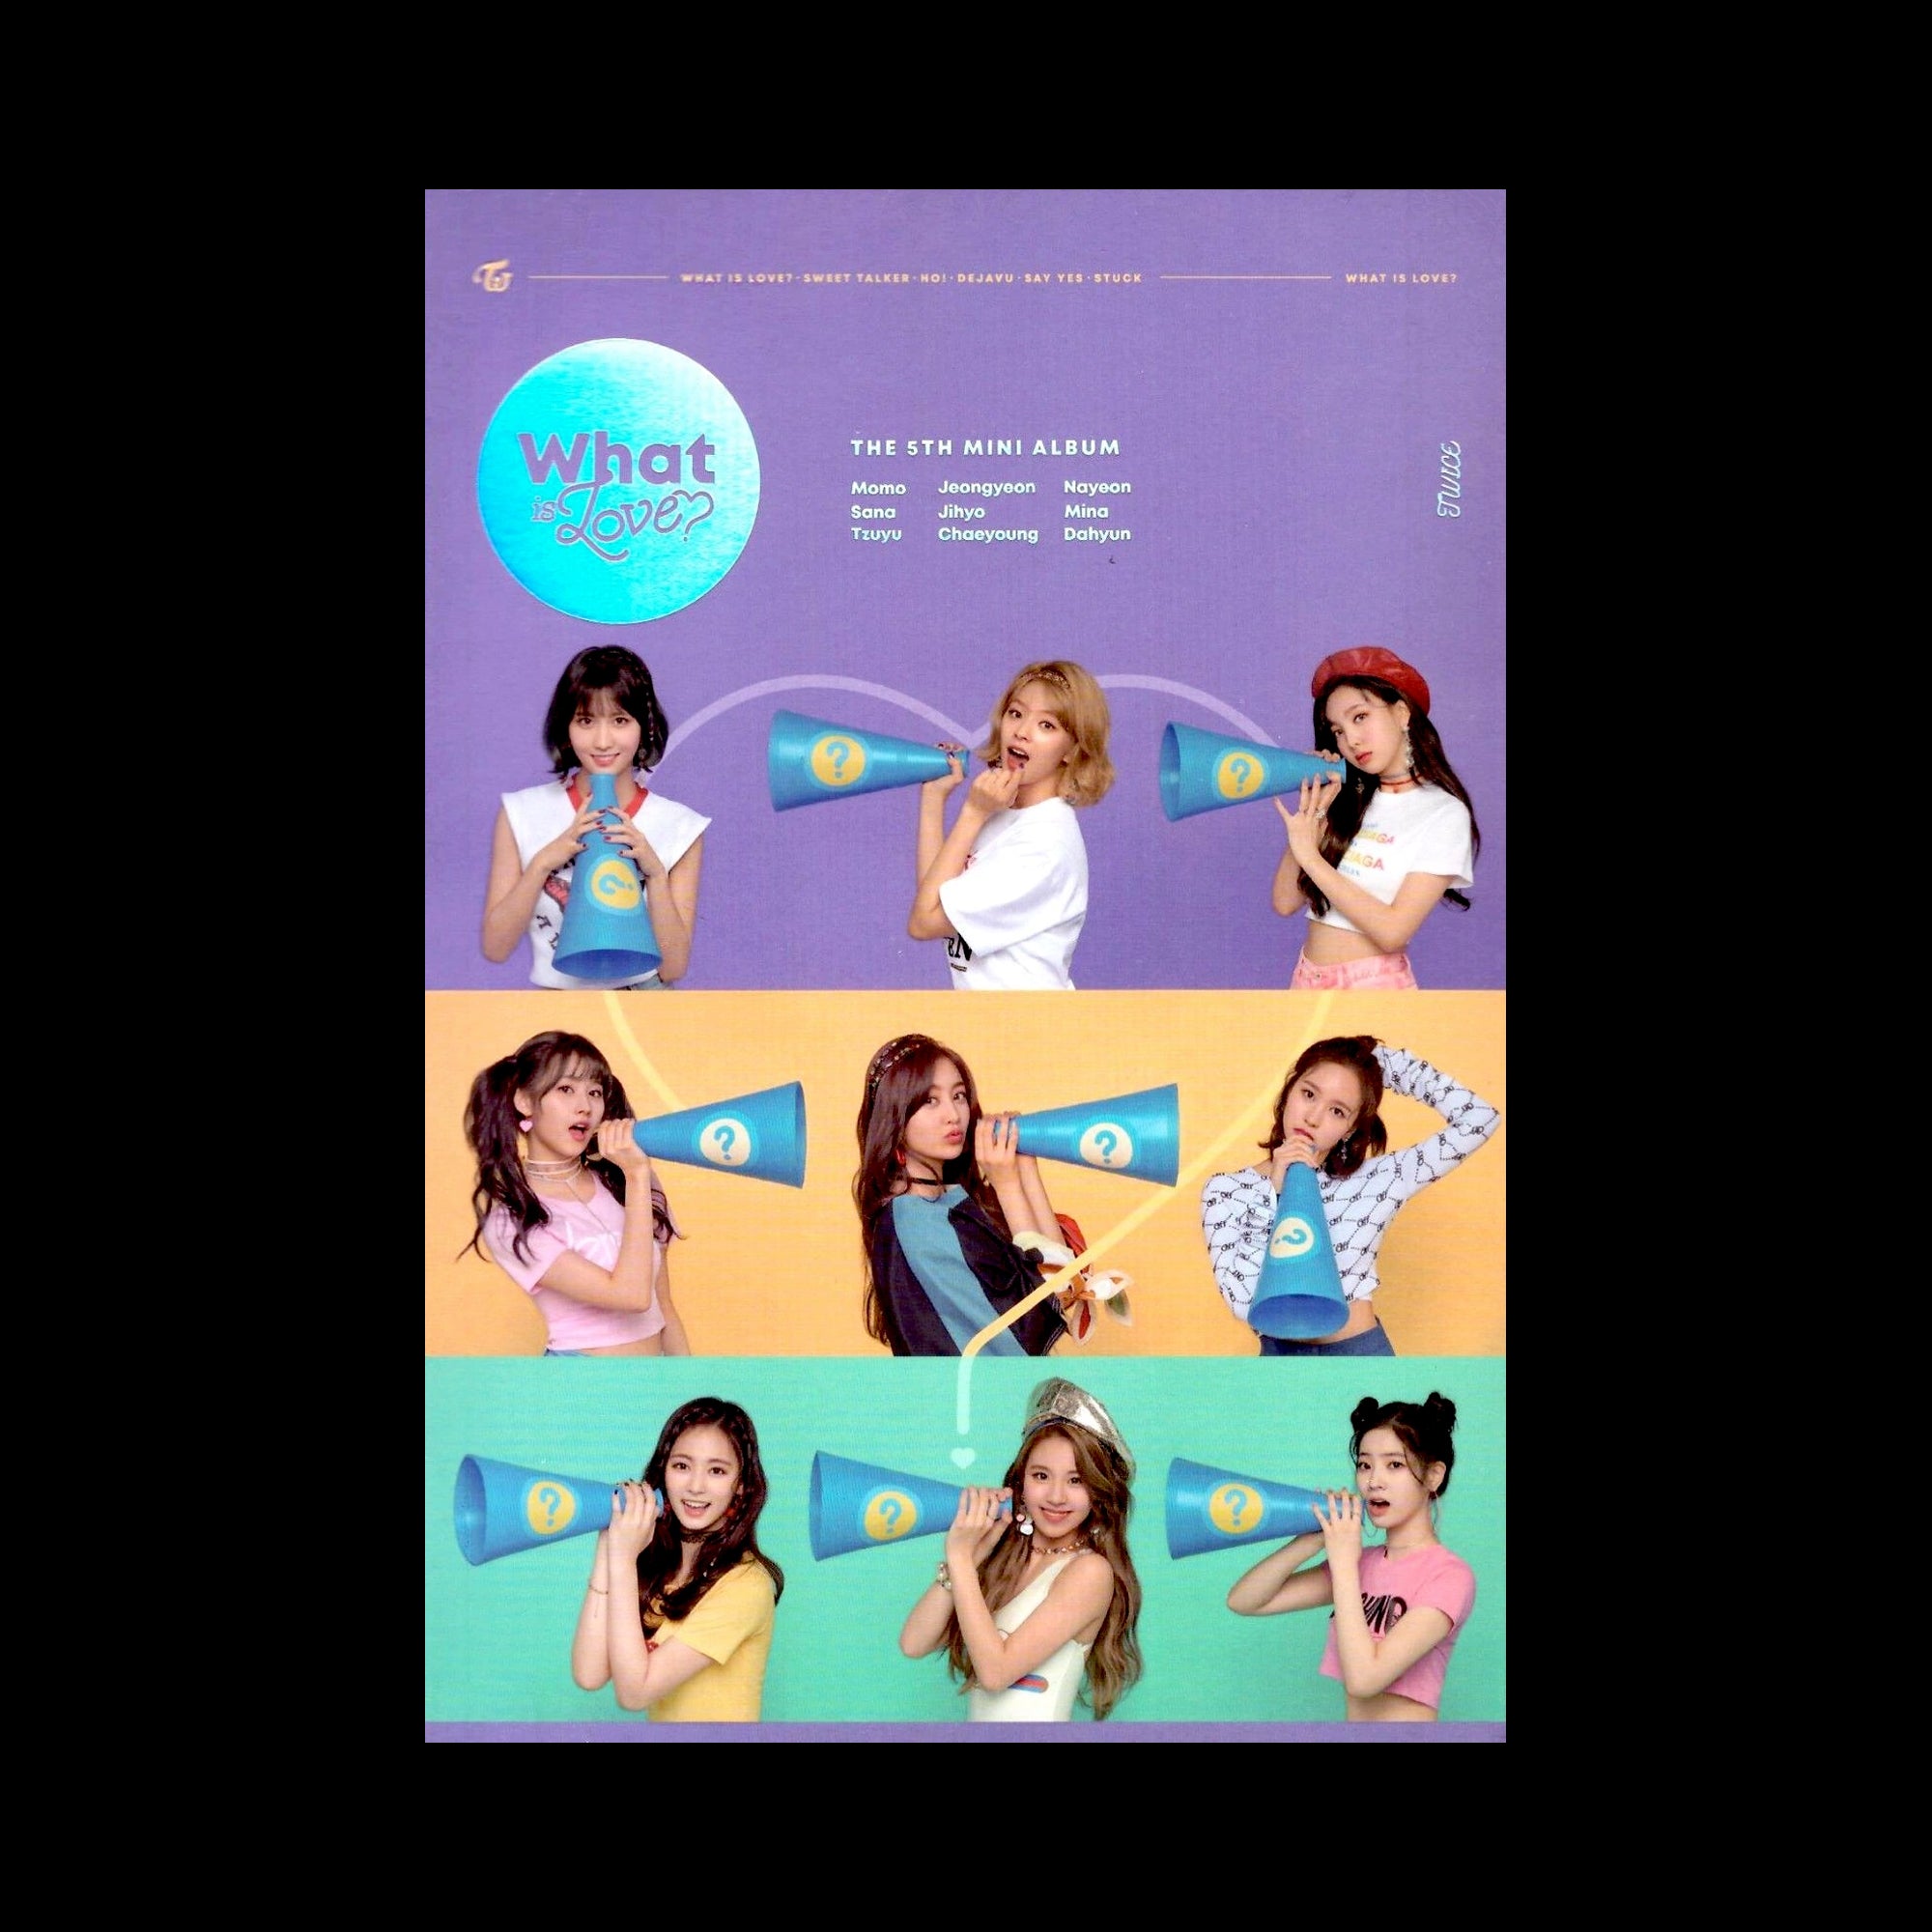 [POSTER] TWICE - What is Love?